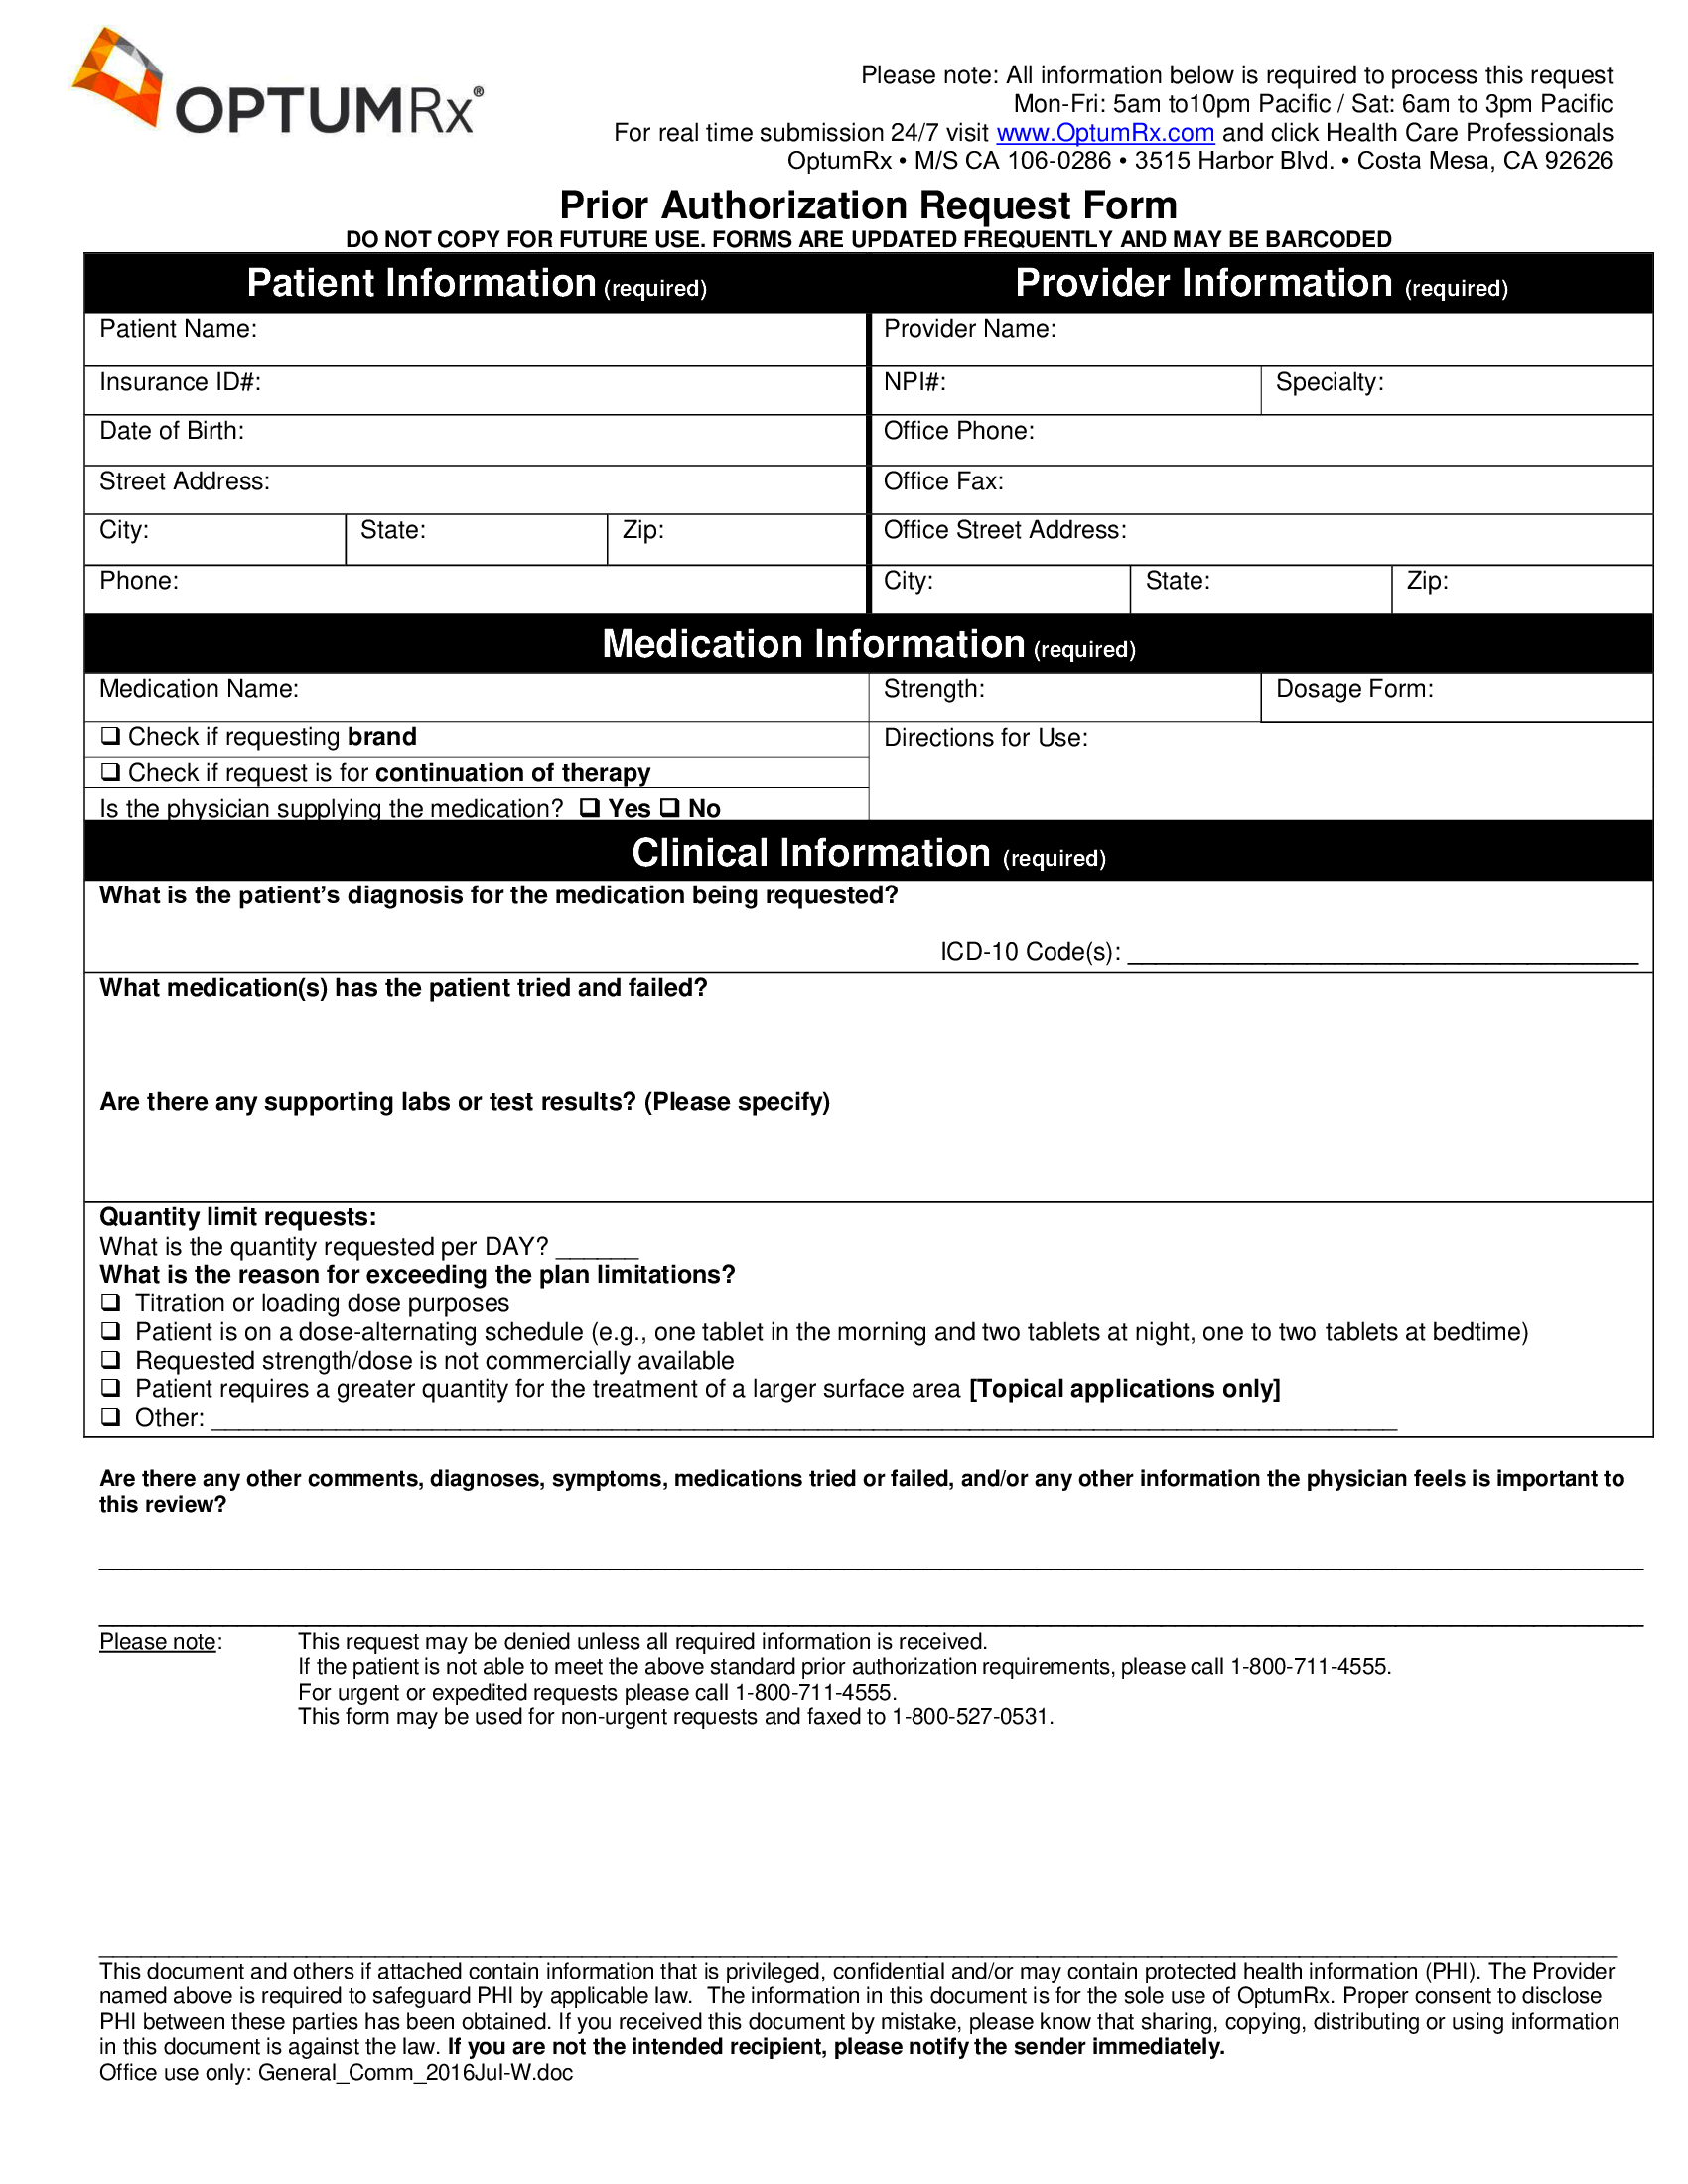 Fillable Prior Authorization Request Form on PDFLiner